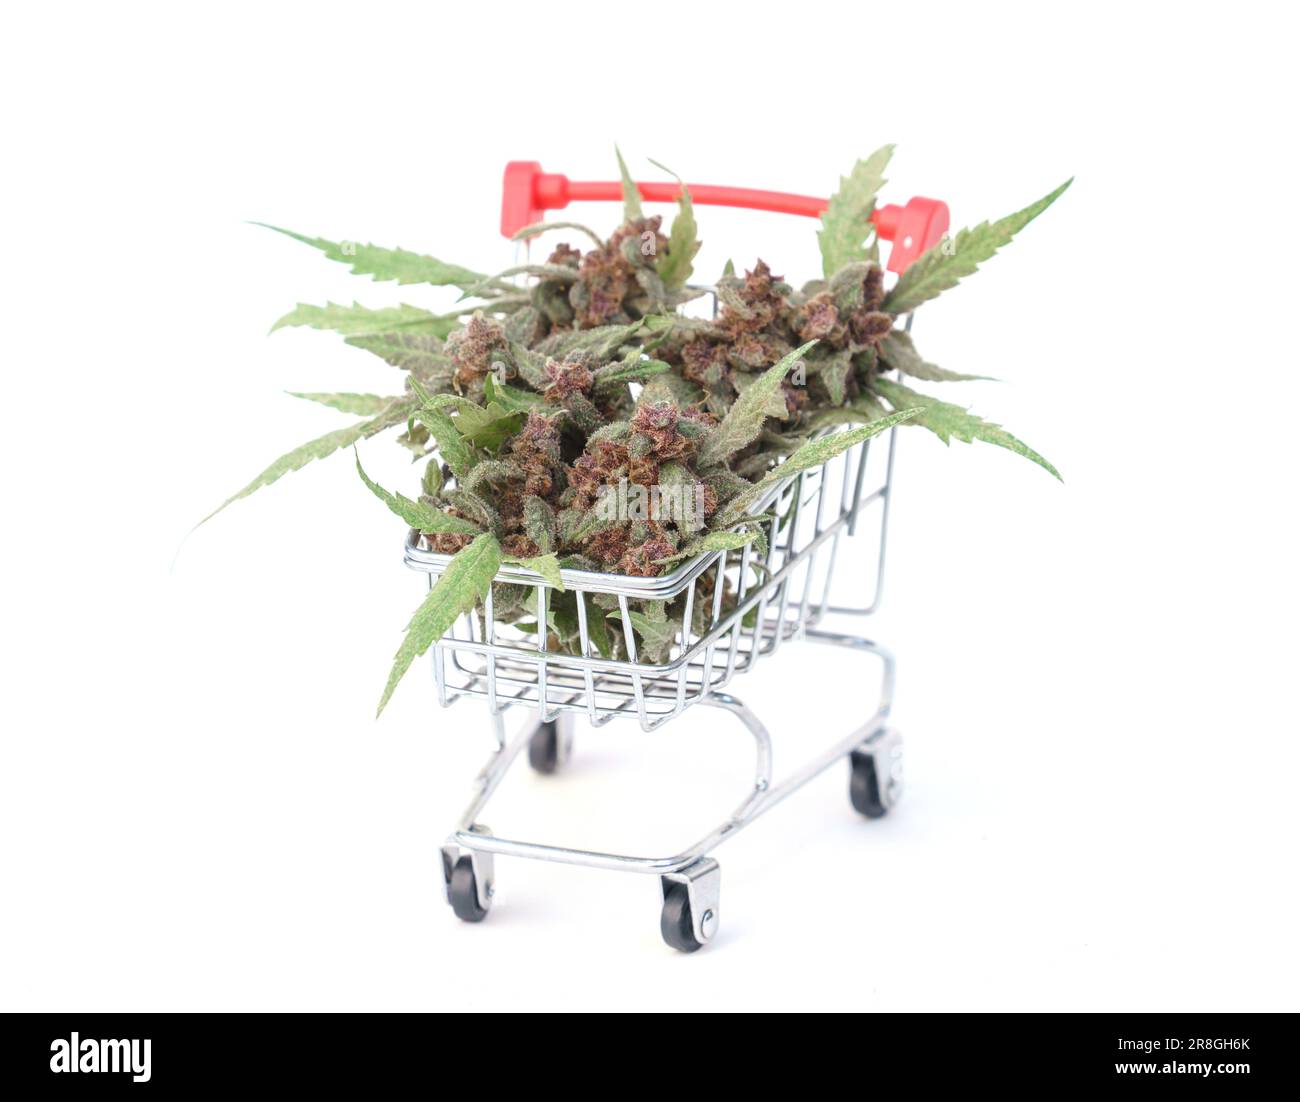 Close up of flowering cannabis plant in trolley on white background Stock Photo